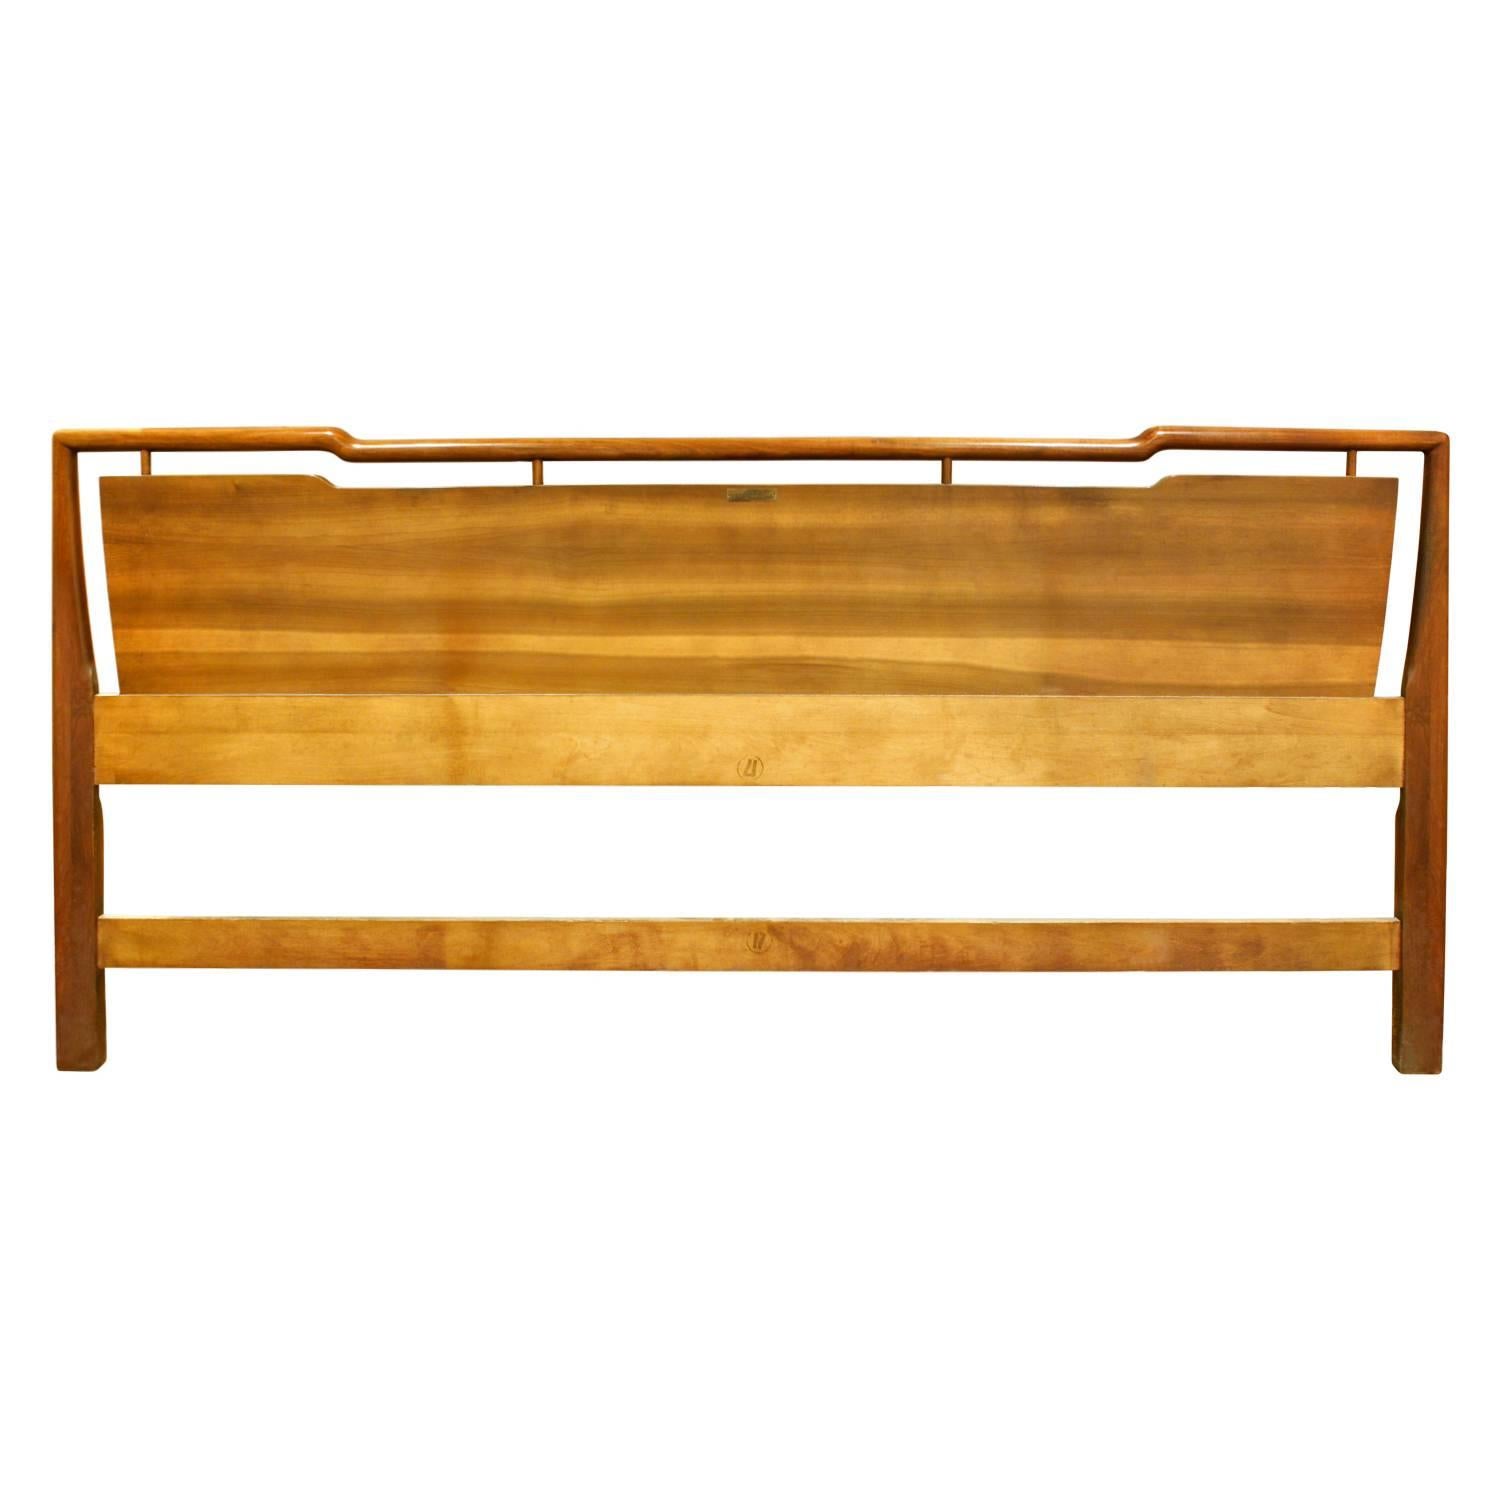 king-size head board in walnut with brass accents by JohnWiddicomb, American, 1950s (metal tag on back reads 